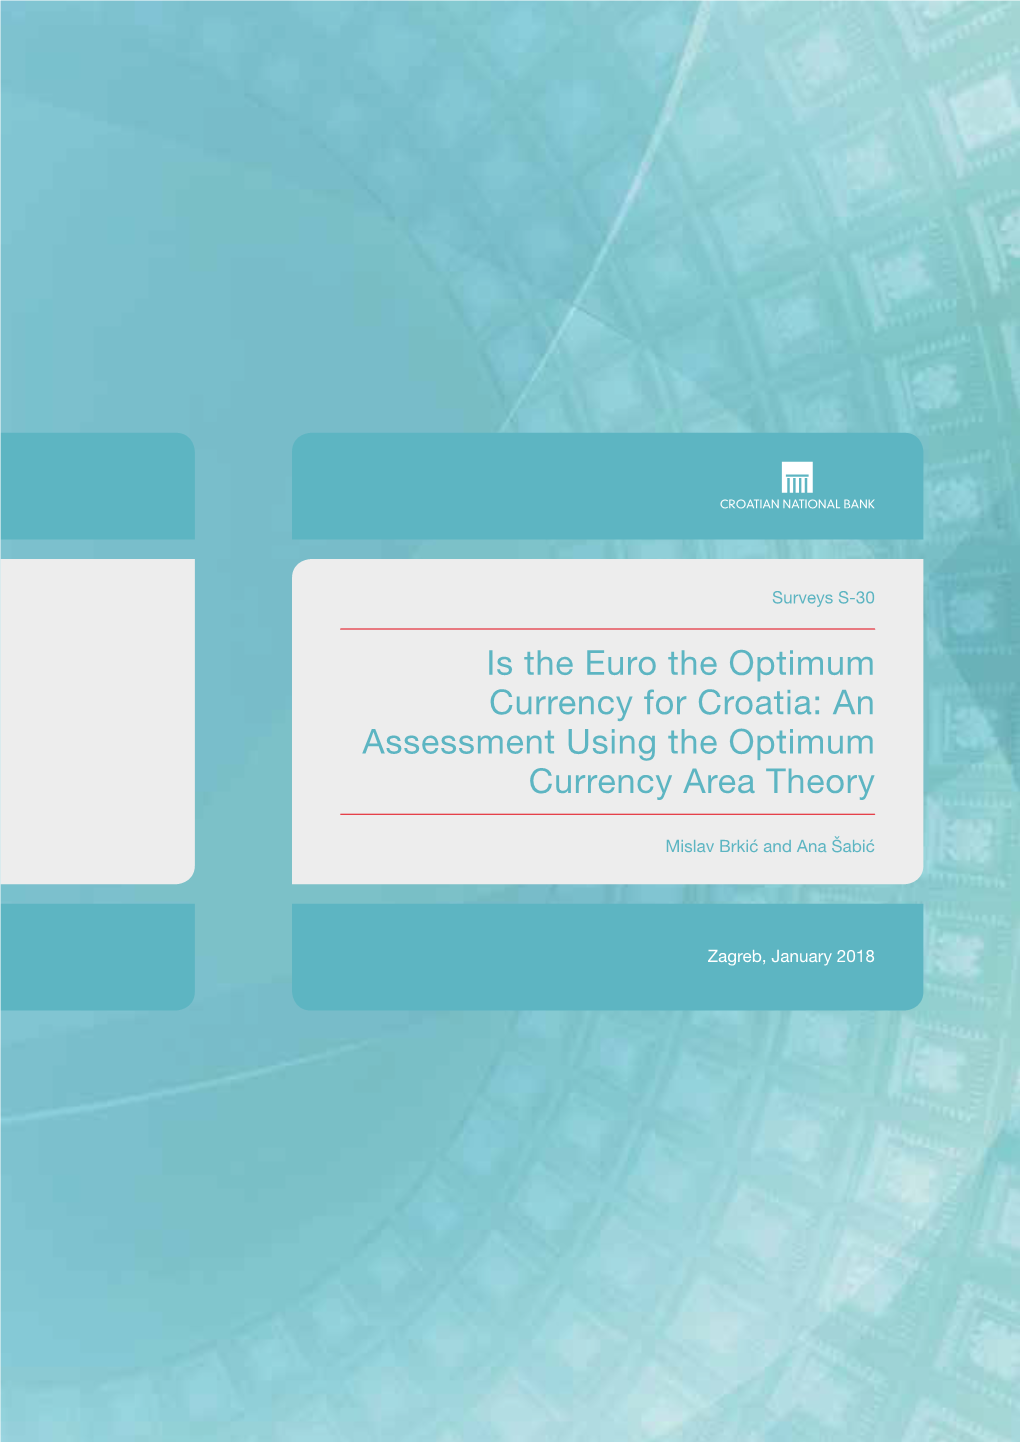 Is the Euro the Optimum Currency for Croatia: an Assessment Using the Optimum Currency Area Theory